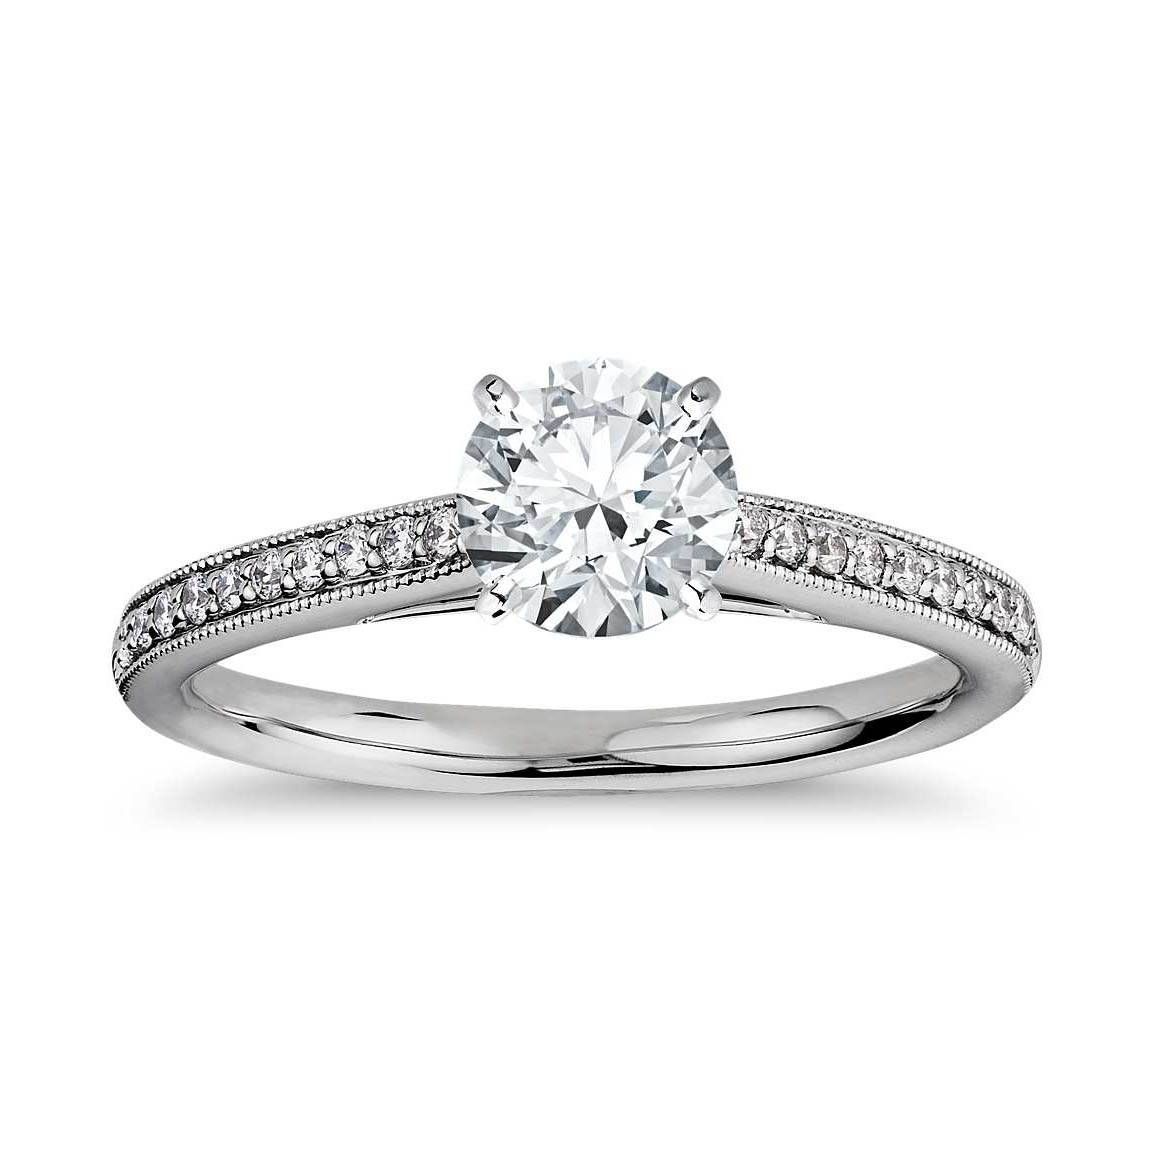 Pavé Cubic Zirconia Engagement Ring In 14k White Gold Plated Over Regarding White Gold Zirconia Wedding Rings (View 4 of 15)